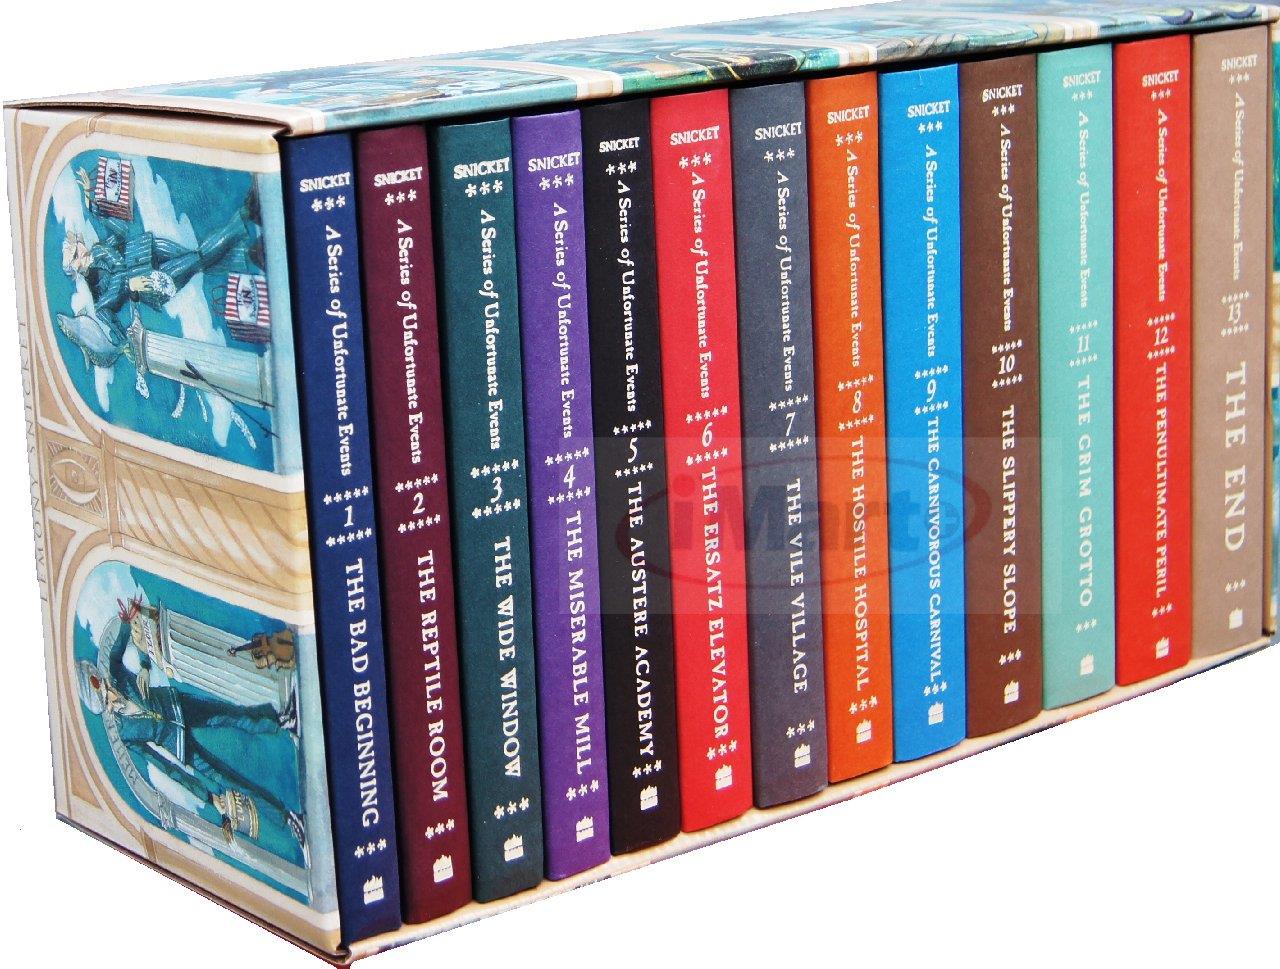 Lemony Snicket A Series of Unfortunate Events Complete Wreck Book Set